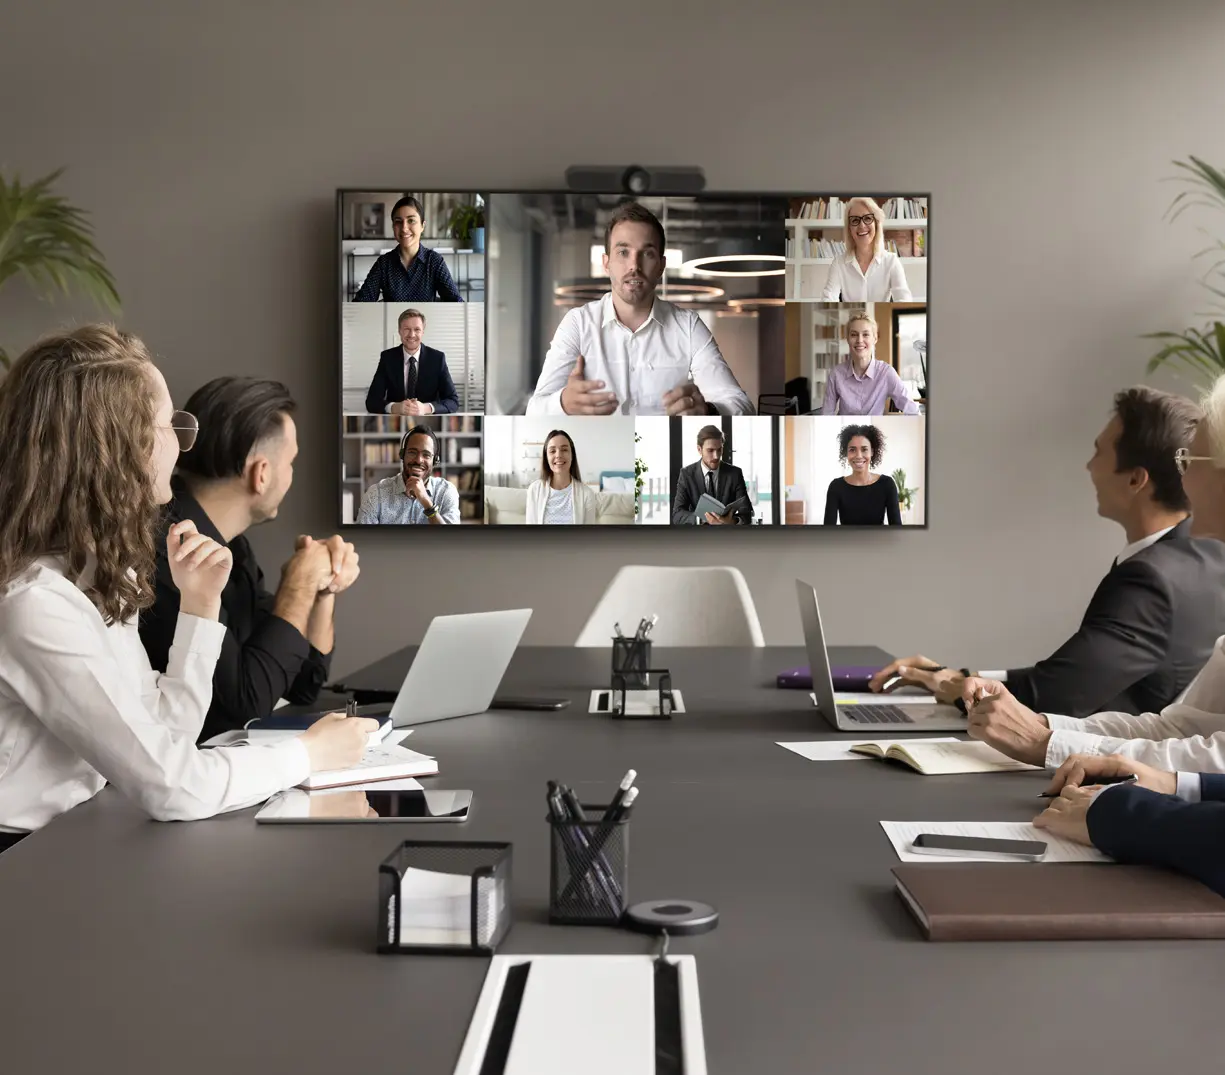 A group of people sitting at a table and viewing a virtual meeting on a screen mounted to the wall.